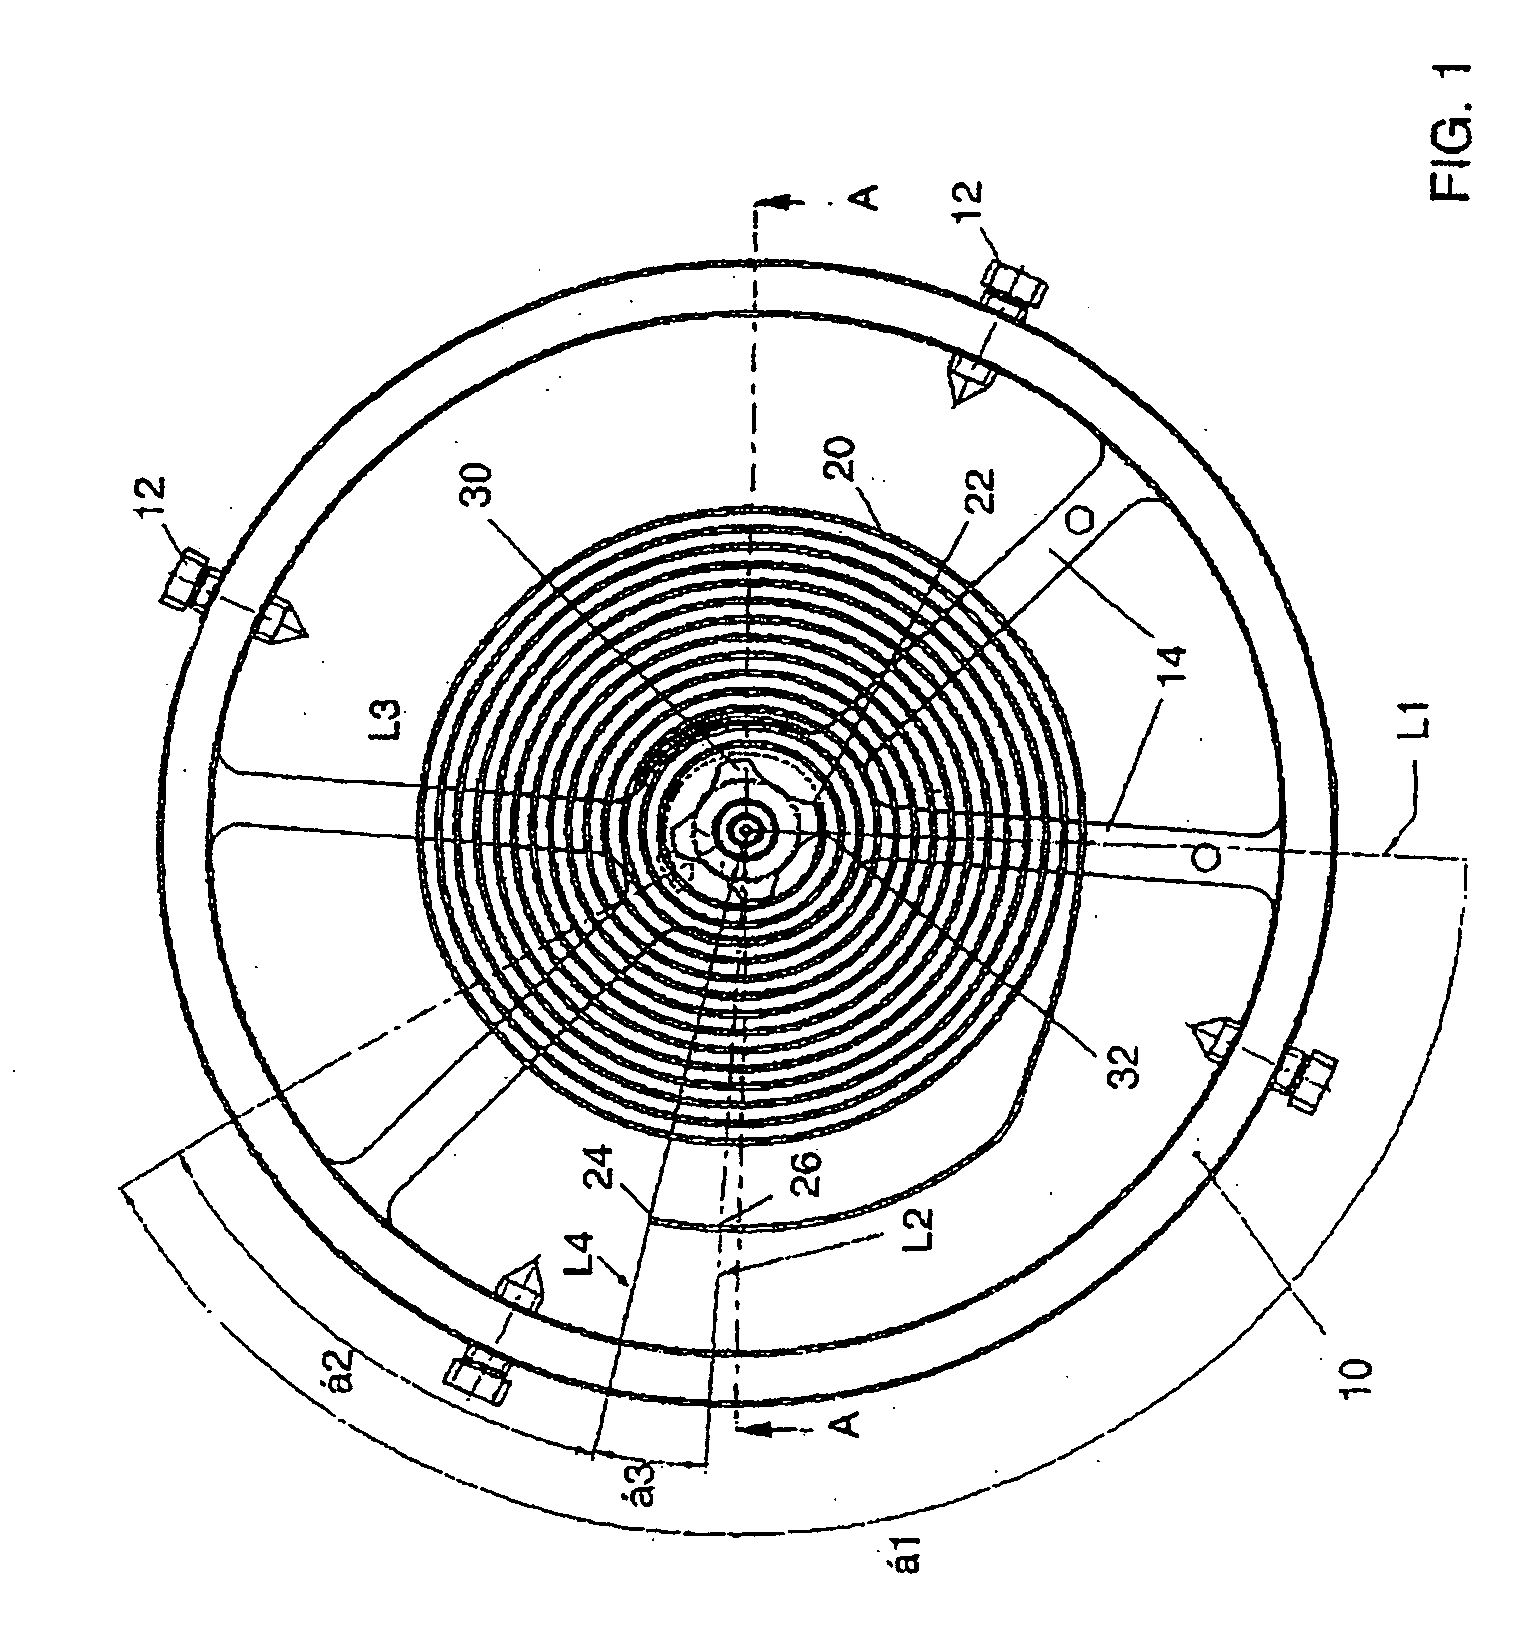 Fixation of a spiral spring in a watch movement